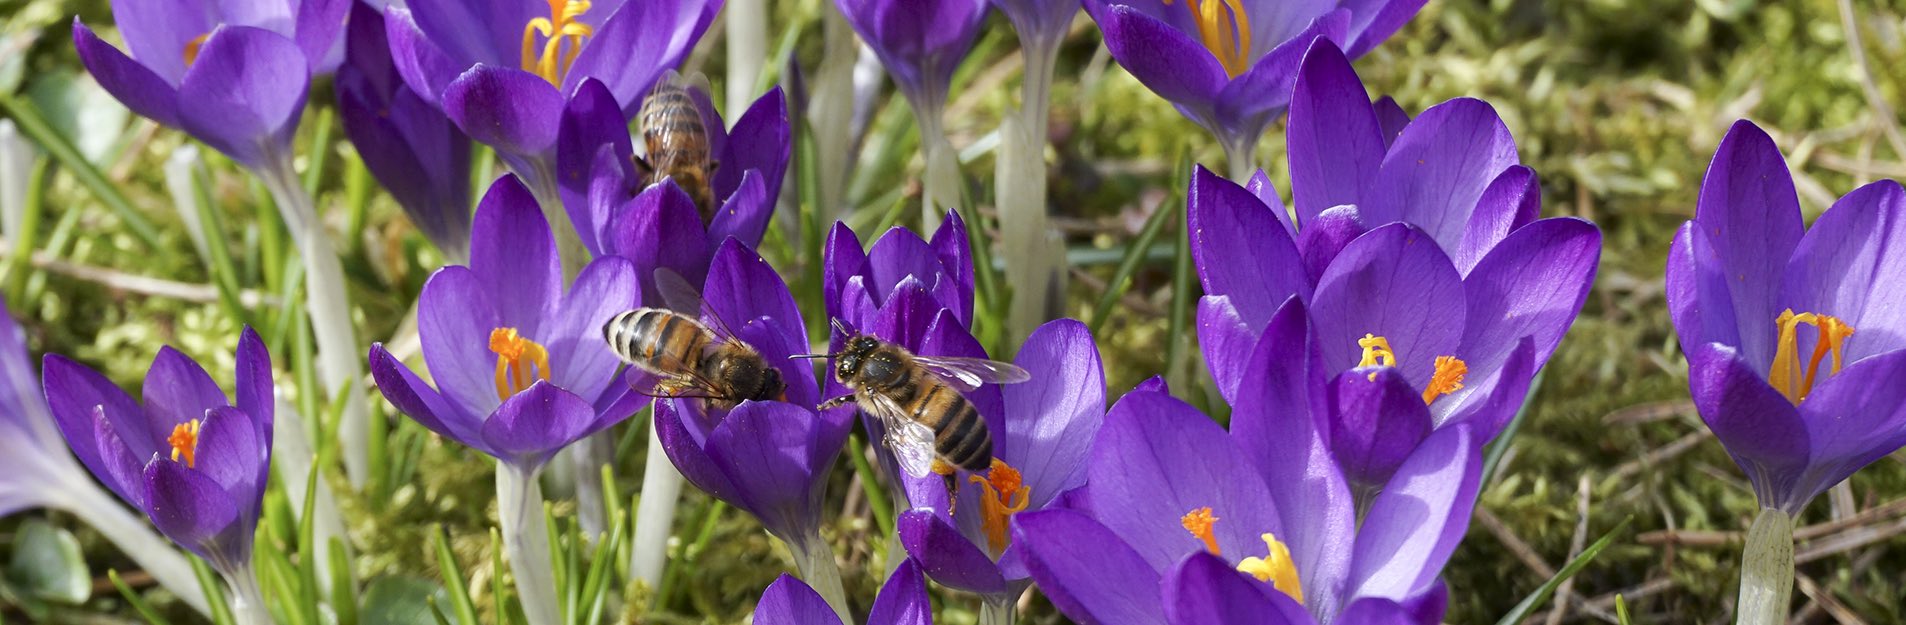 The first bees in spring